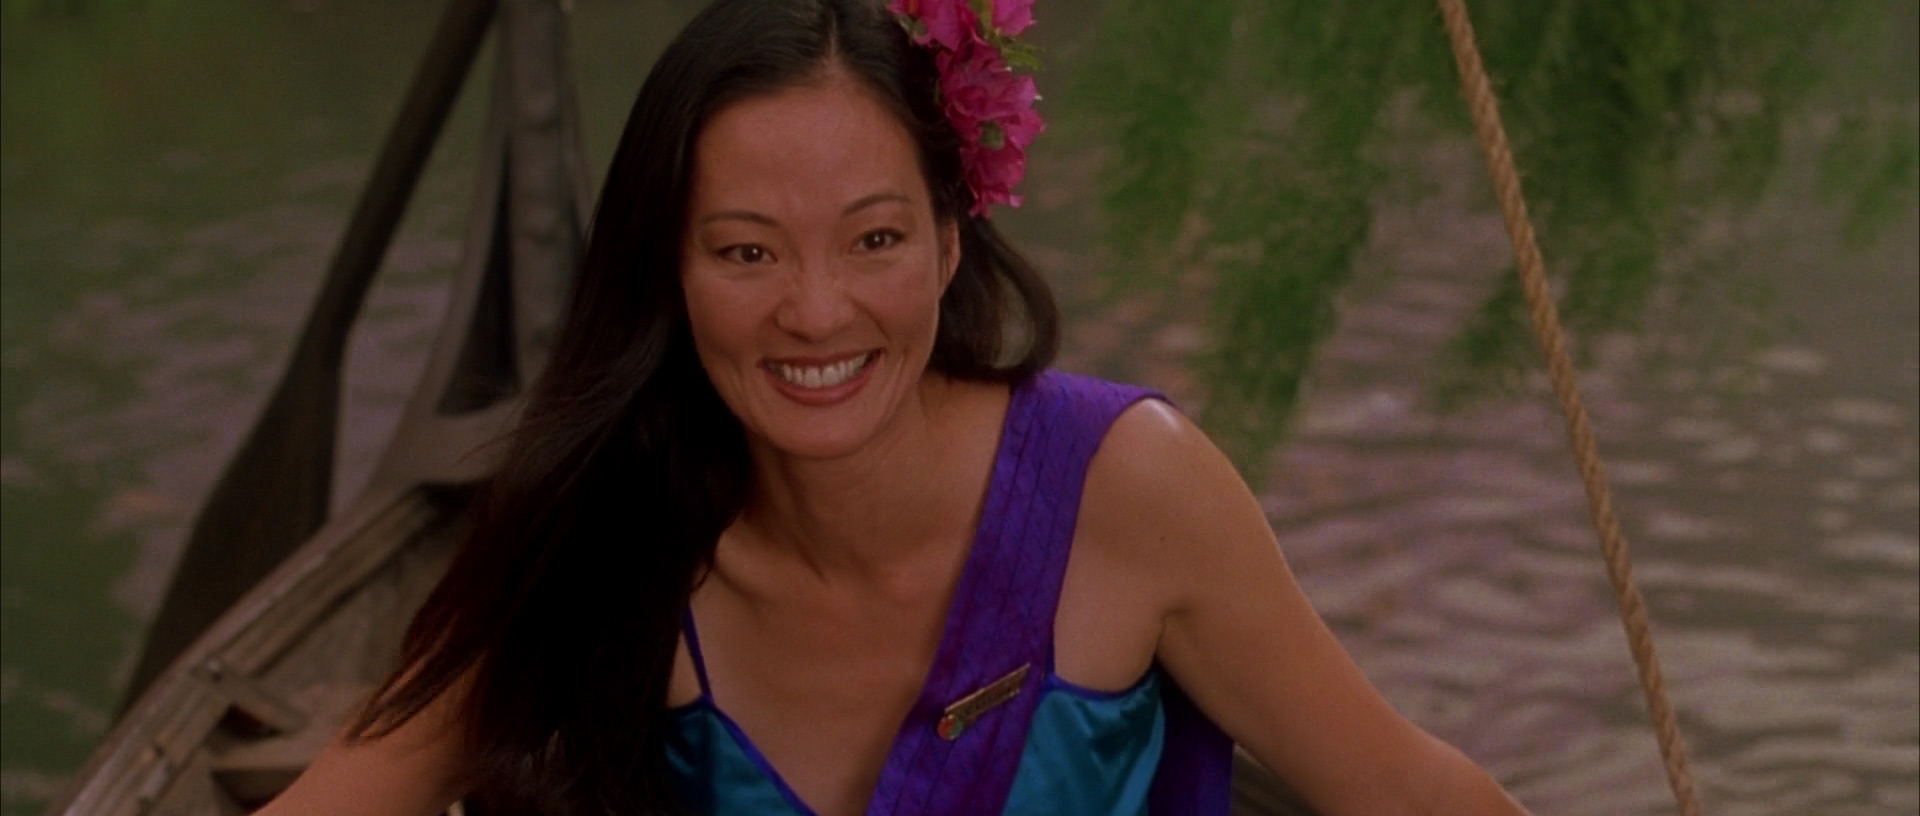 Rosalind Chao in What Dreams May Come